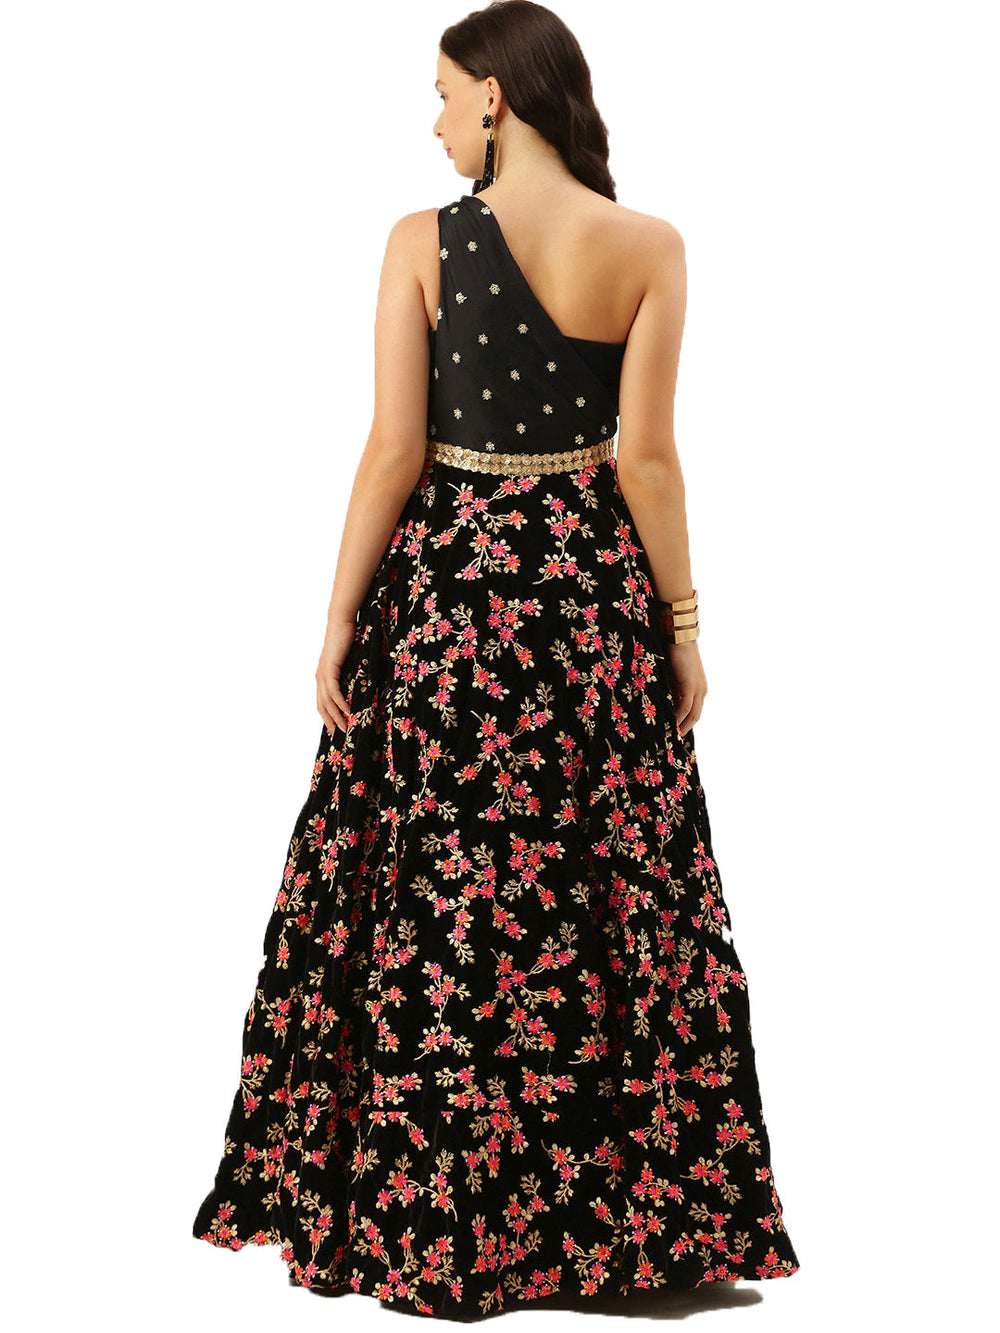 Vogue-One-Shoulder-Style-Embroidered-Gown